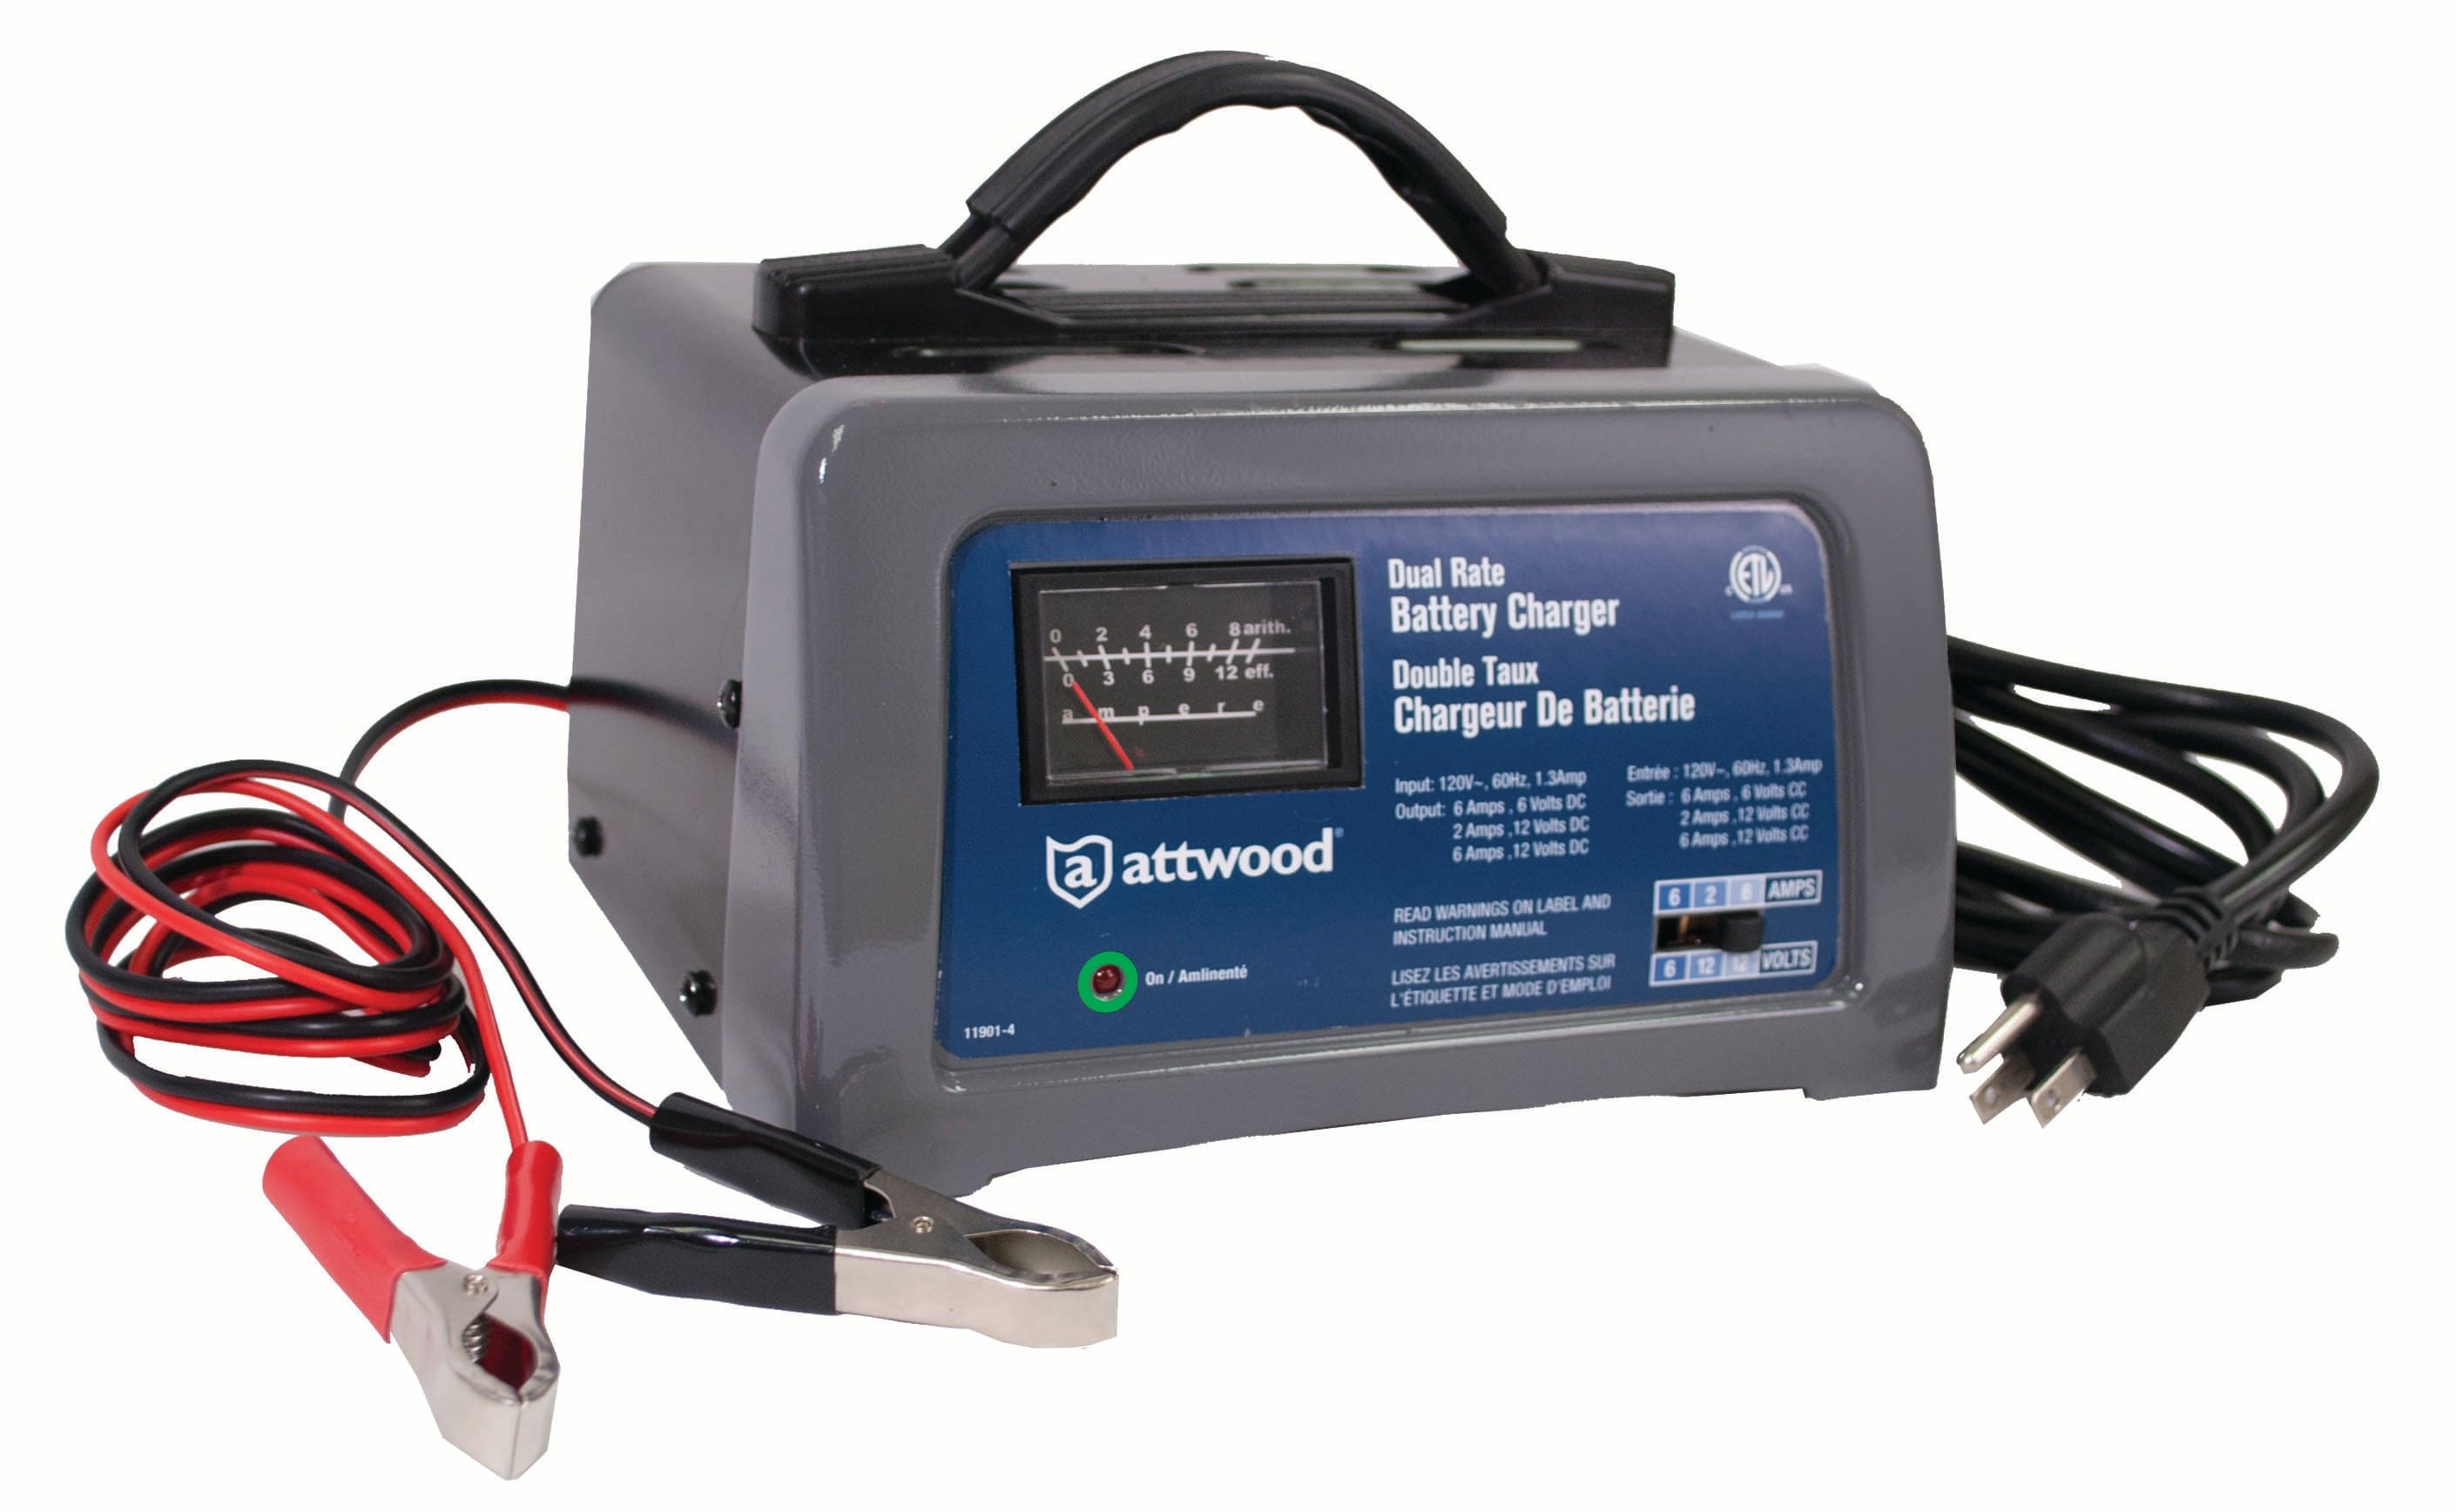 Attwood 11901-4 Dual Rate Automotive Battery Charger